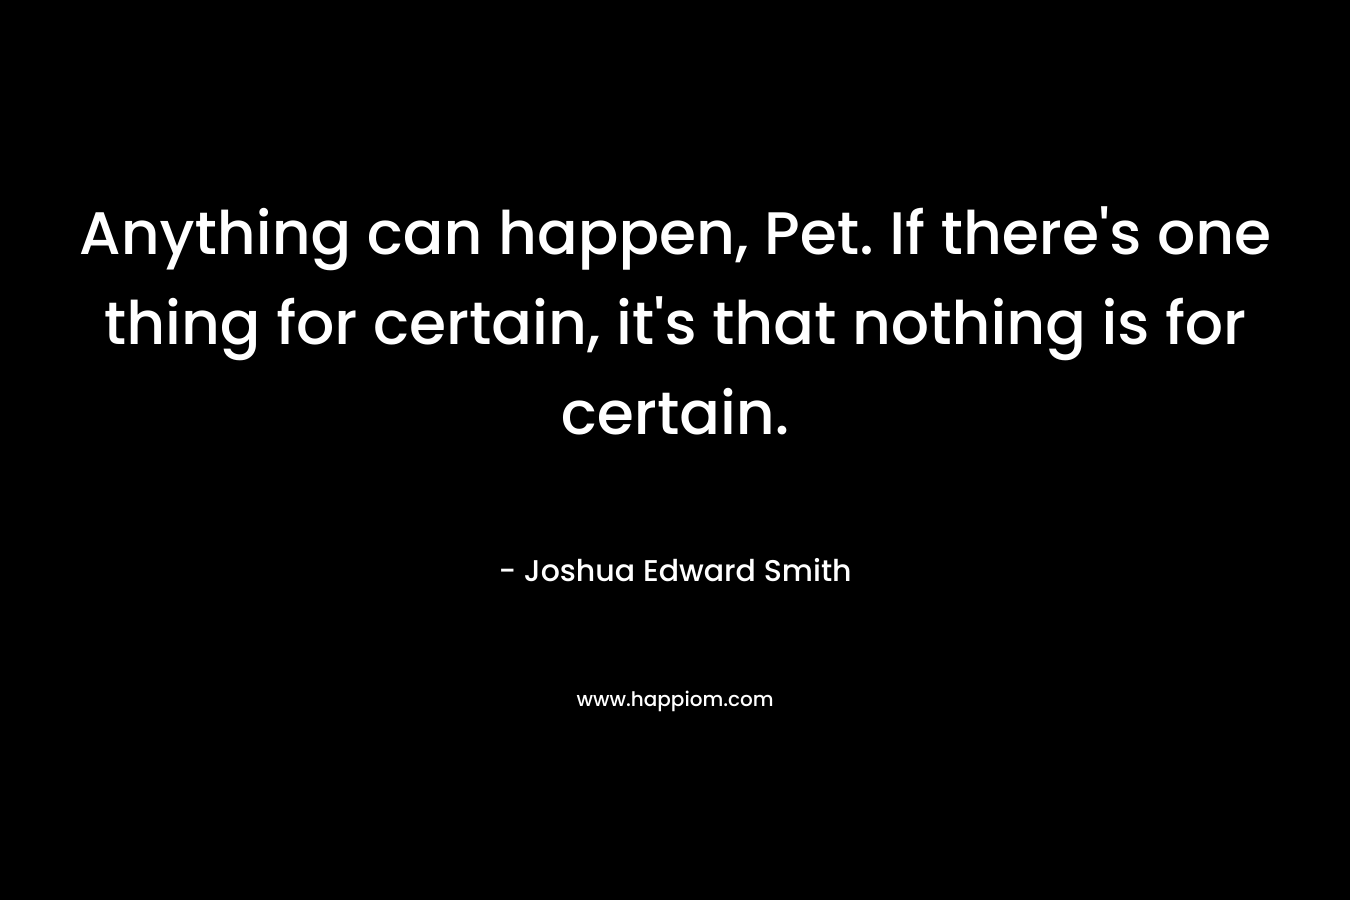 Anything can happen, Pet. If there’s one thing for certain, it’s that nothing is for certain. – Joshua Edward Smith